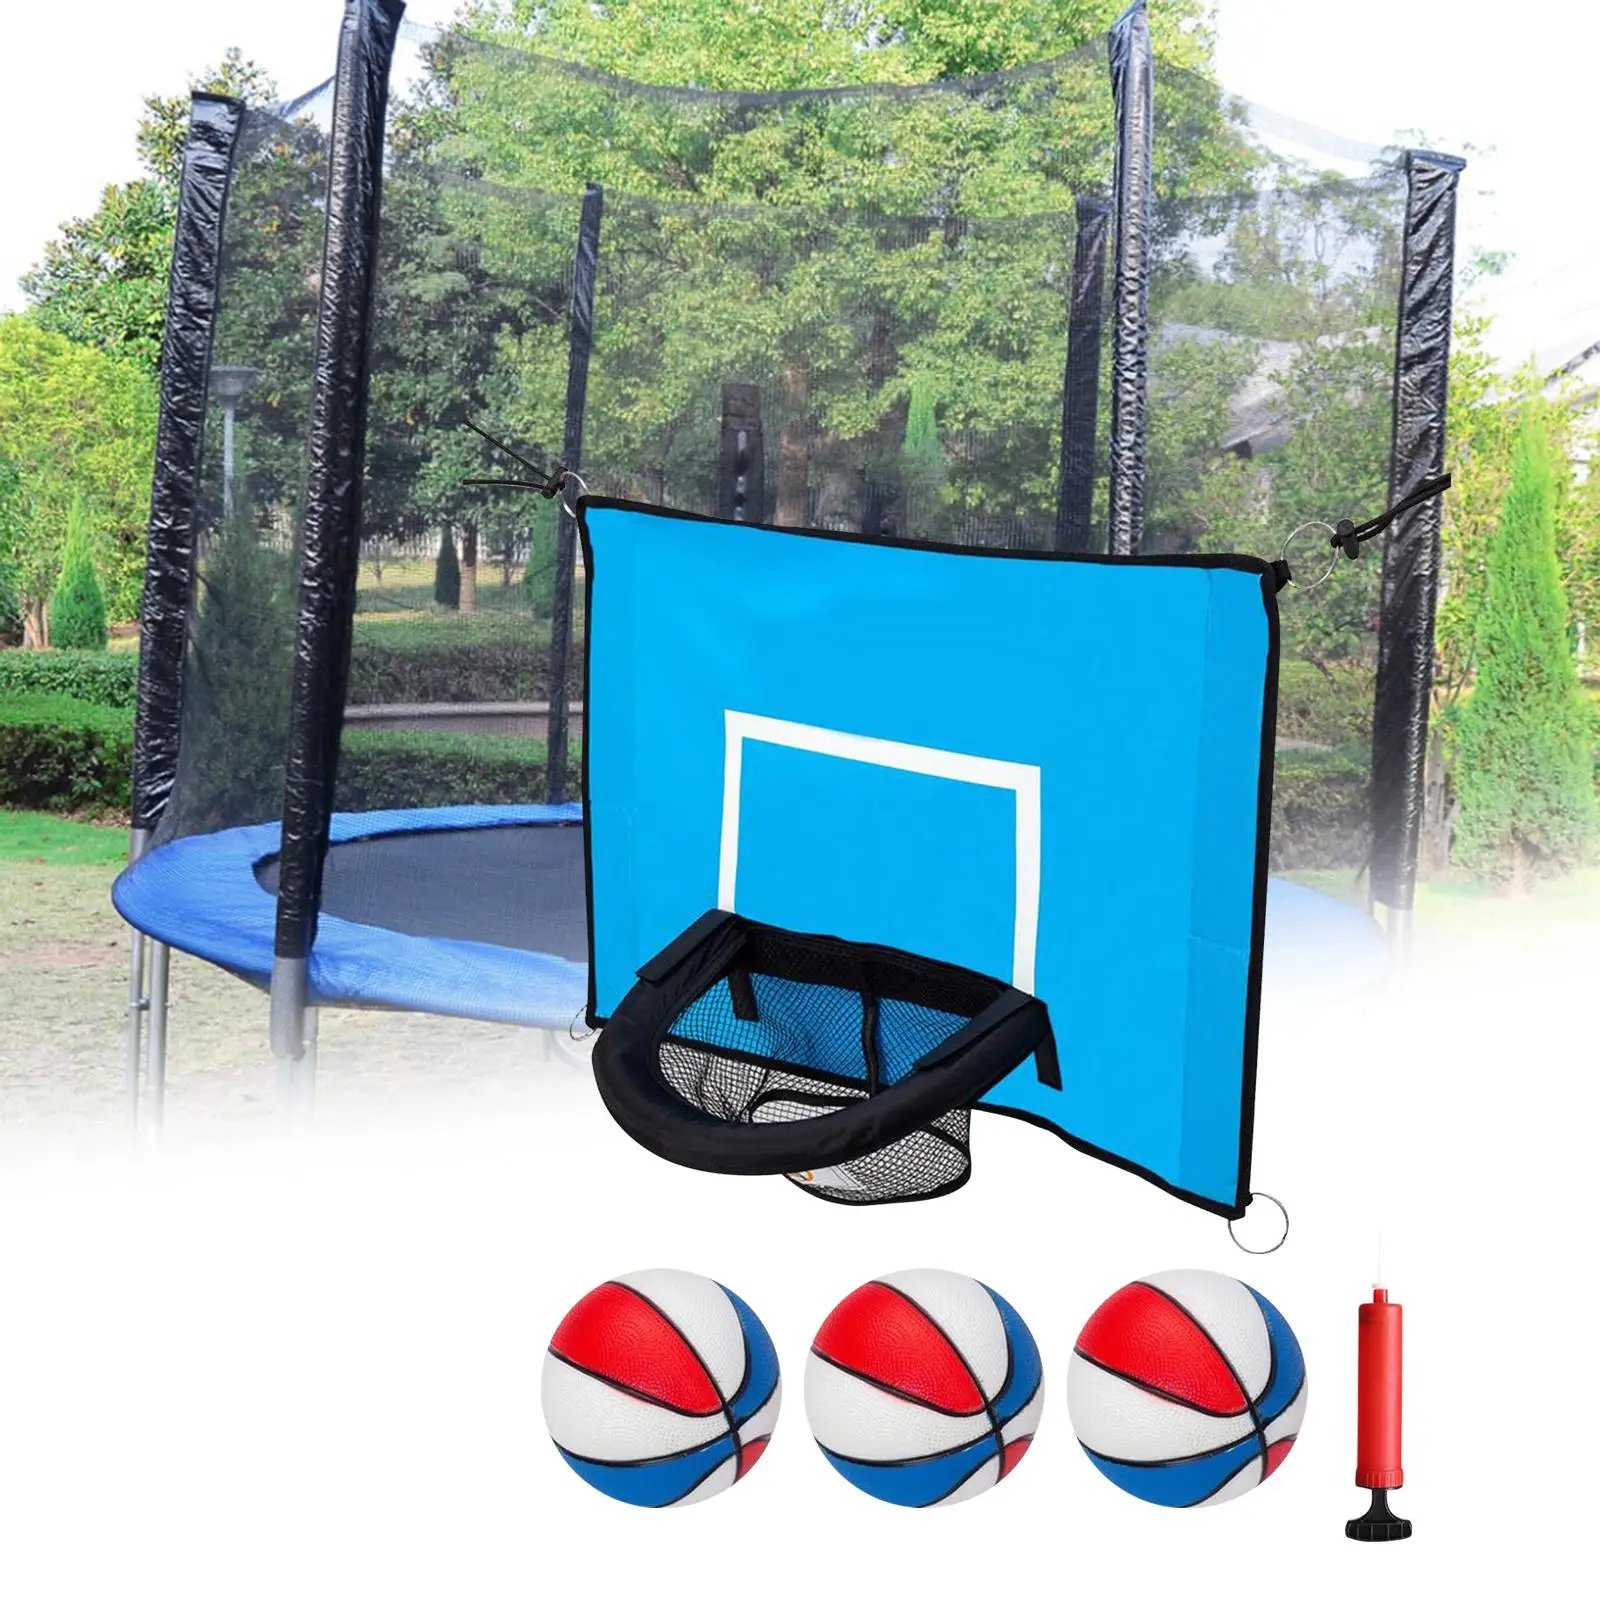 Basketball Hoop for Trampoline Basketball Frame Replacement Boys Girls Toy Easy to Assembled Garden for Dunking Universal